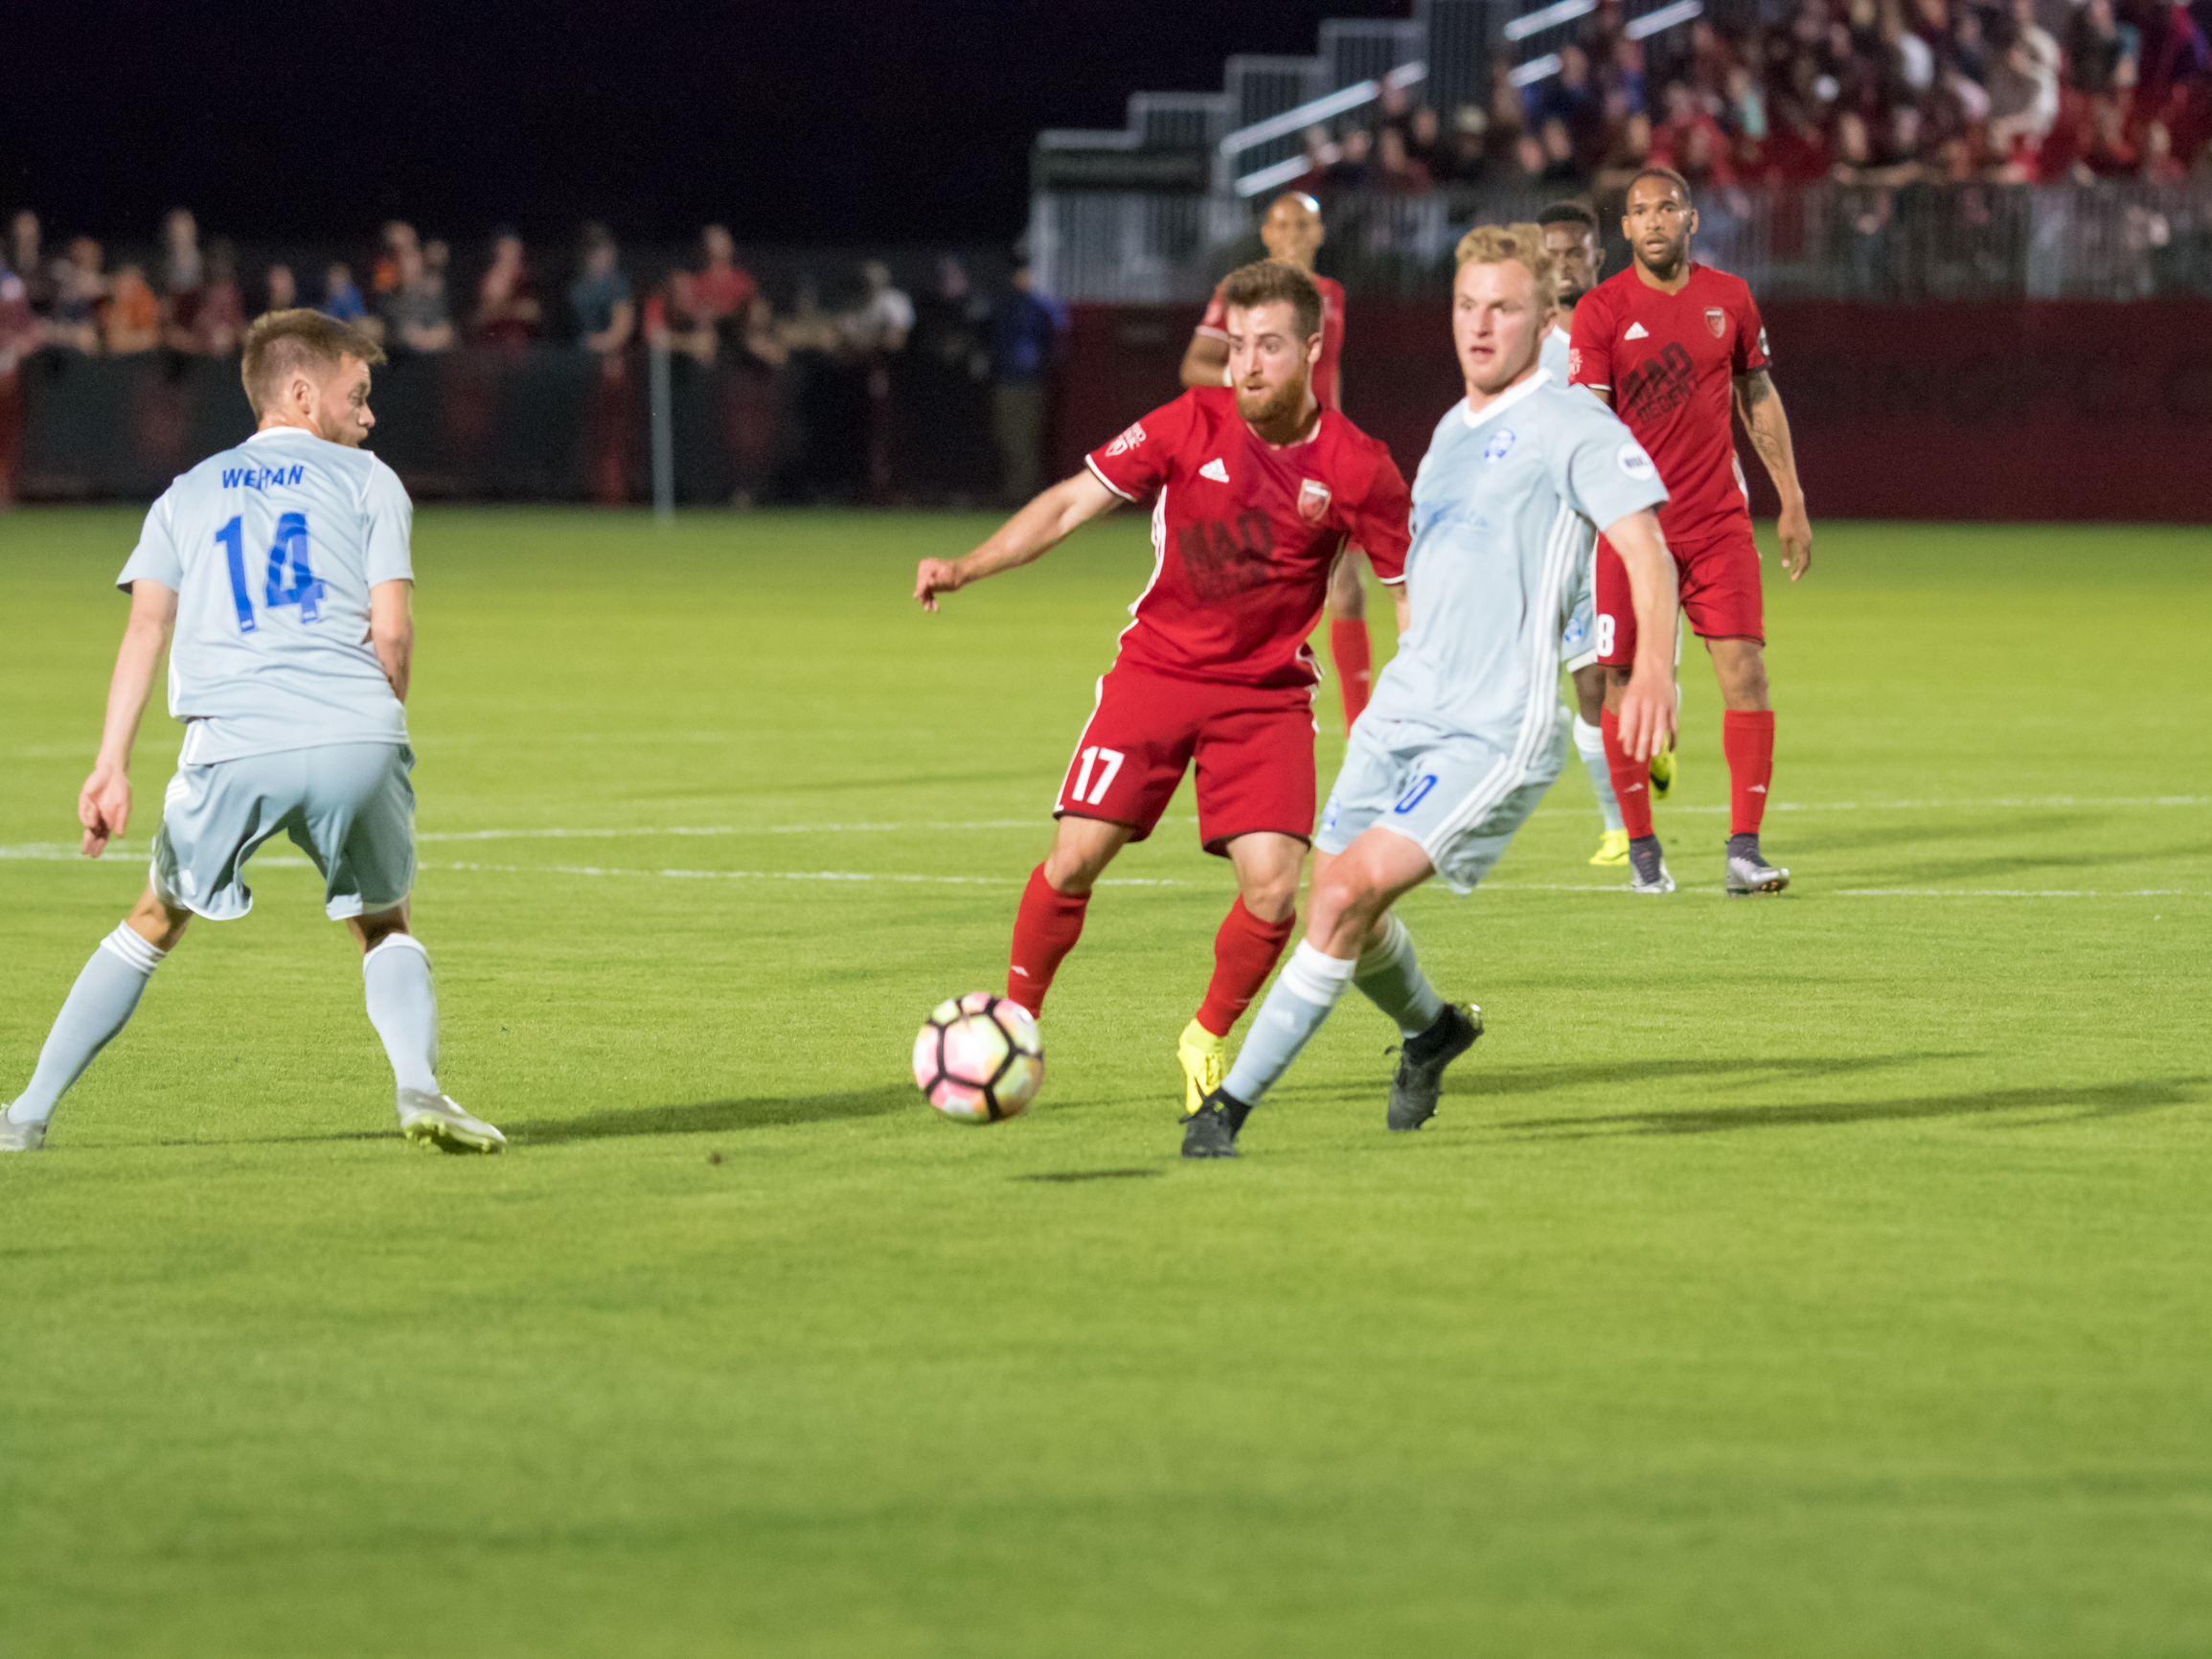 Near Walk-Off Penalty gives Phoenix the Win over Reno 1868 FC